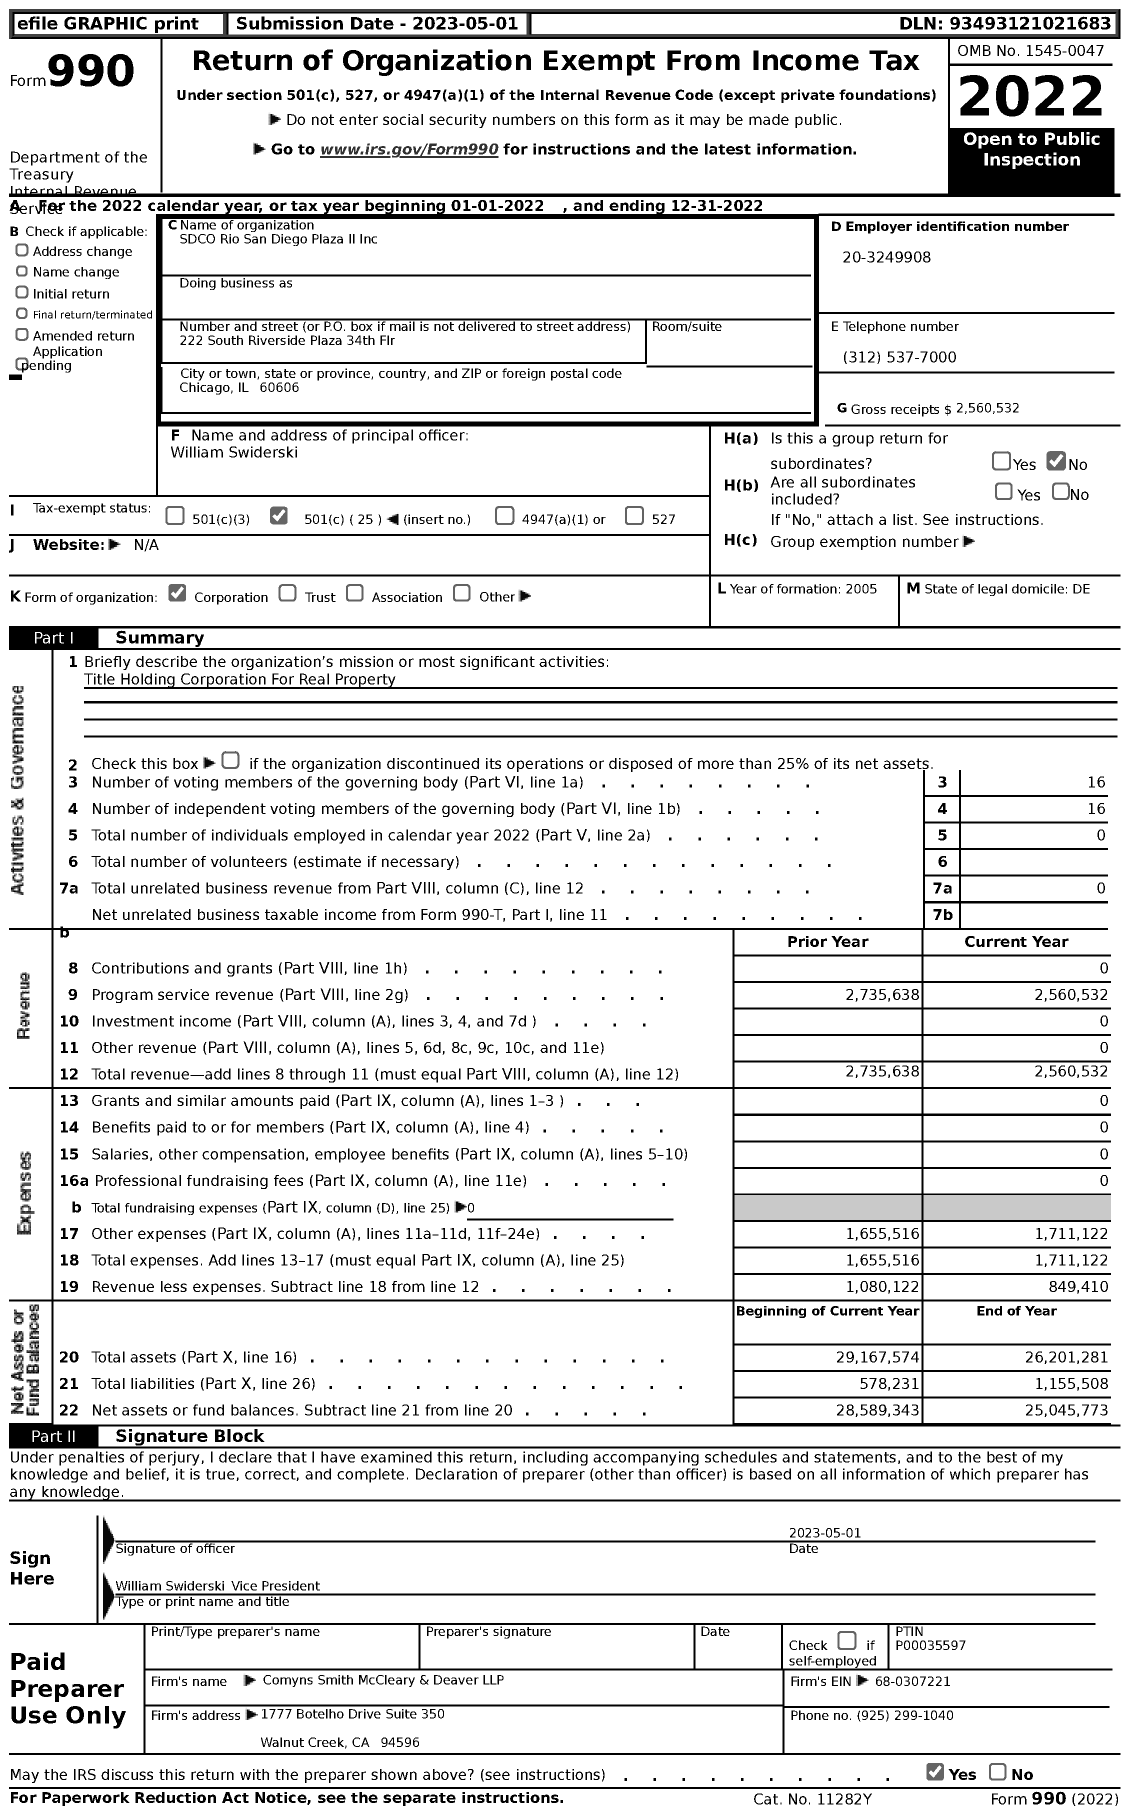 Image of first page of 2022 Form 990 for SDCO Rio San Diego Plaza II